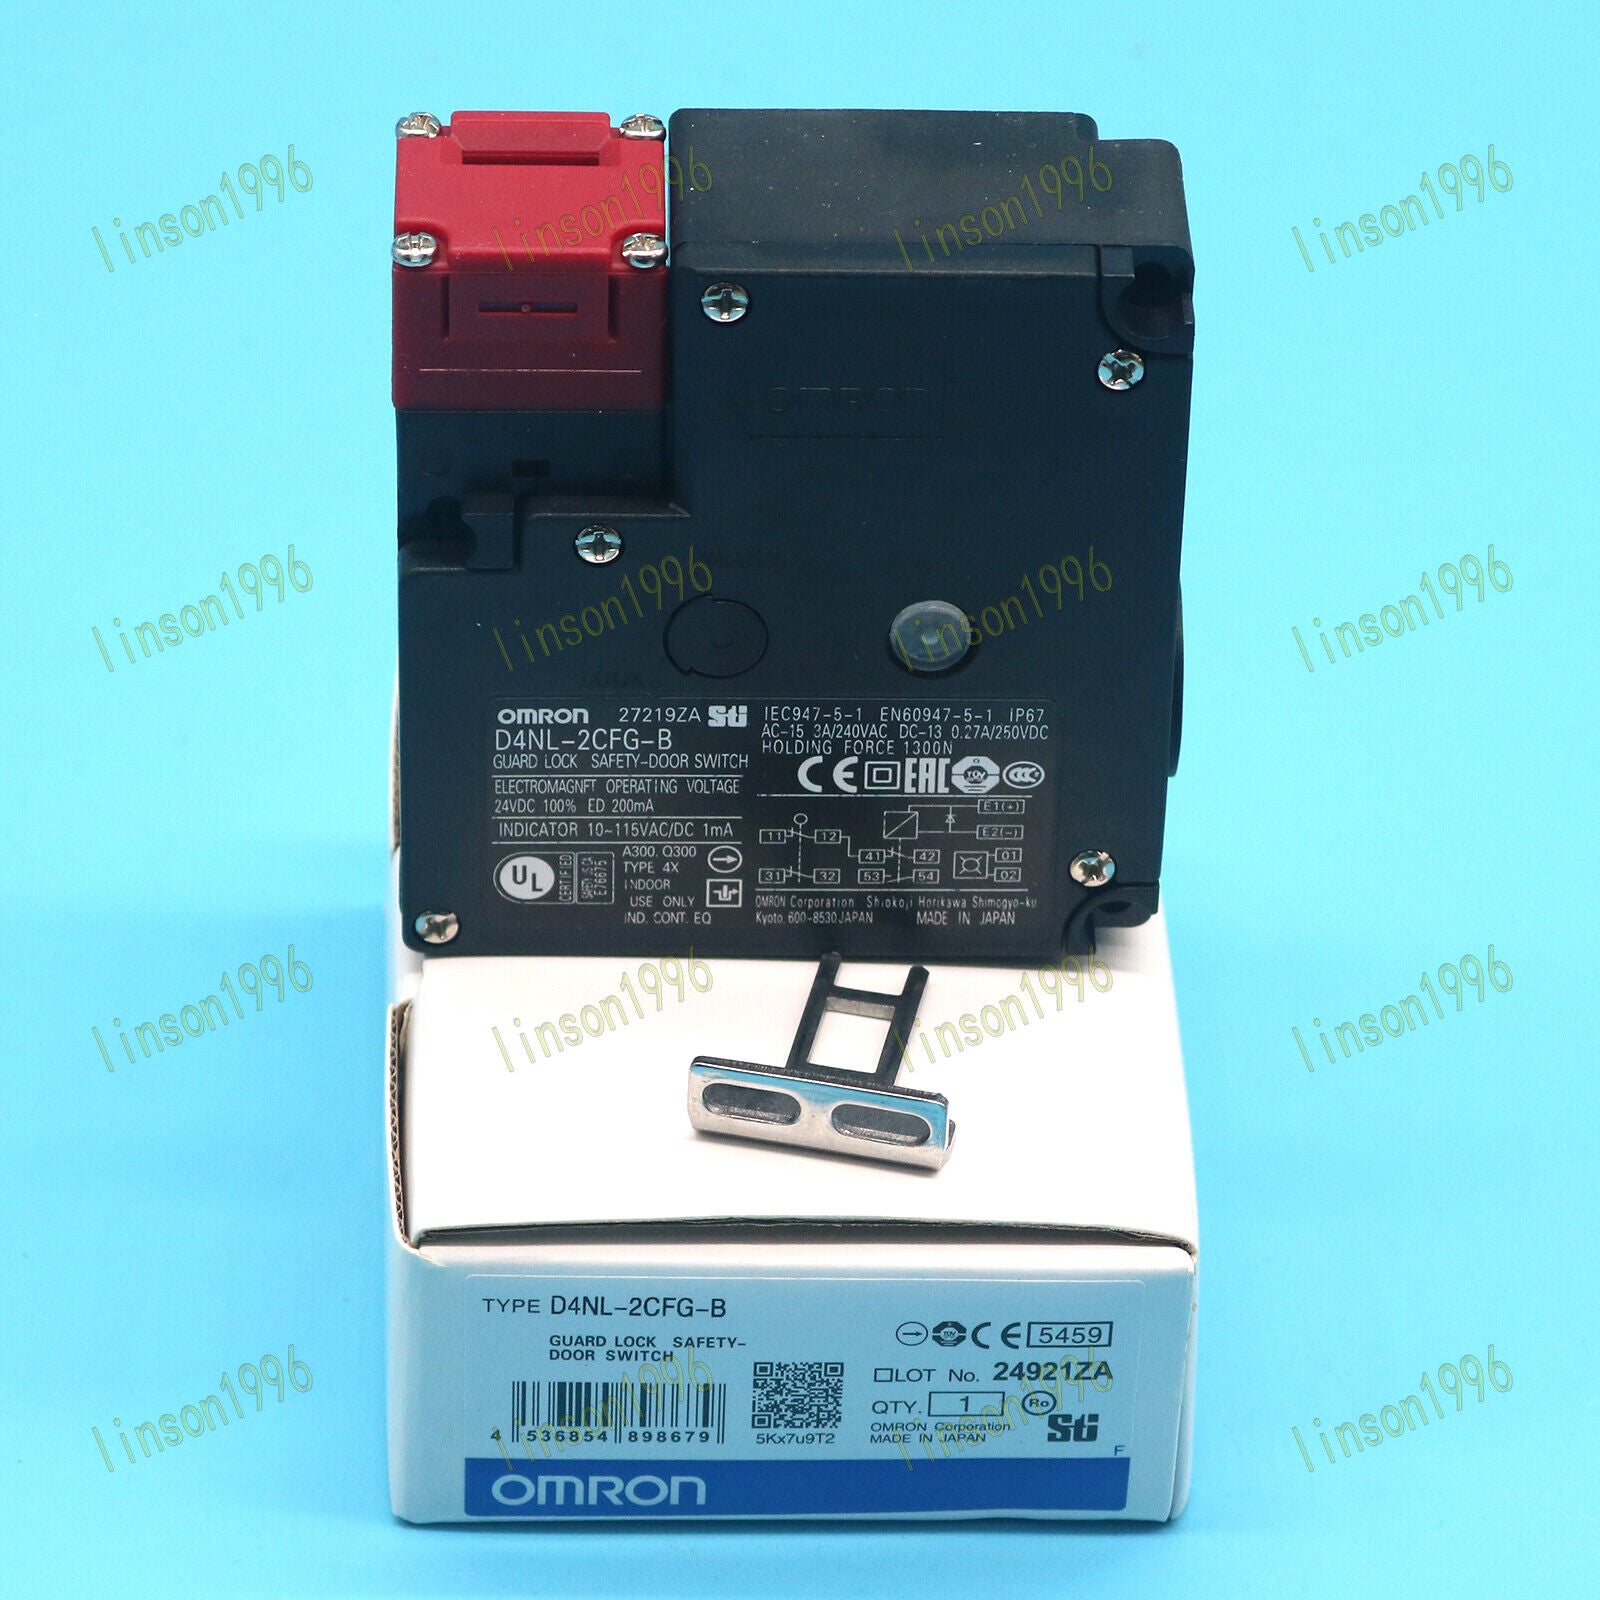 new ONE  D4NL-2CFG-B Omron D4NL2CFGB guard lock safety door switch Fast Delivery